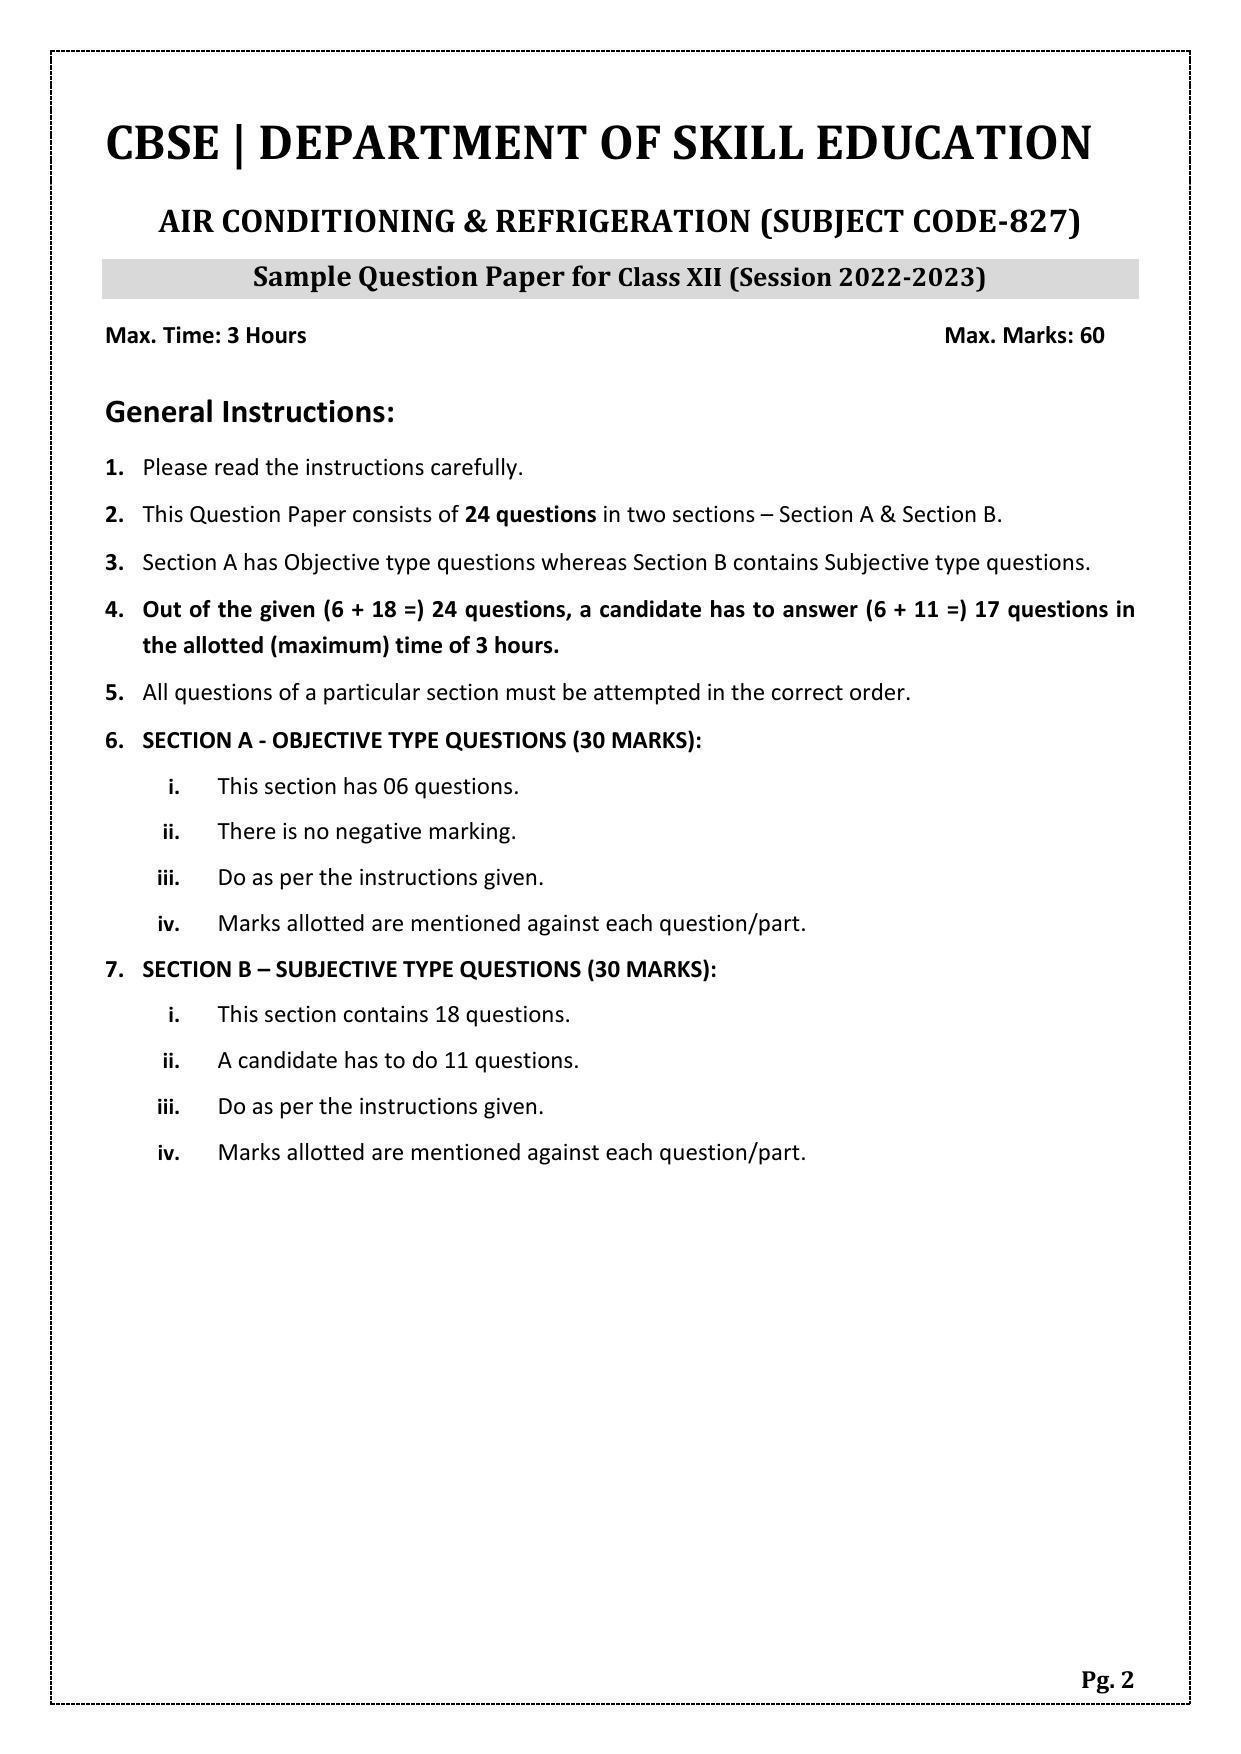 CBSE Class 12 Air-Conditioning & Refrigeration (Skill Education) Sample Papers 2023 - Page 2